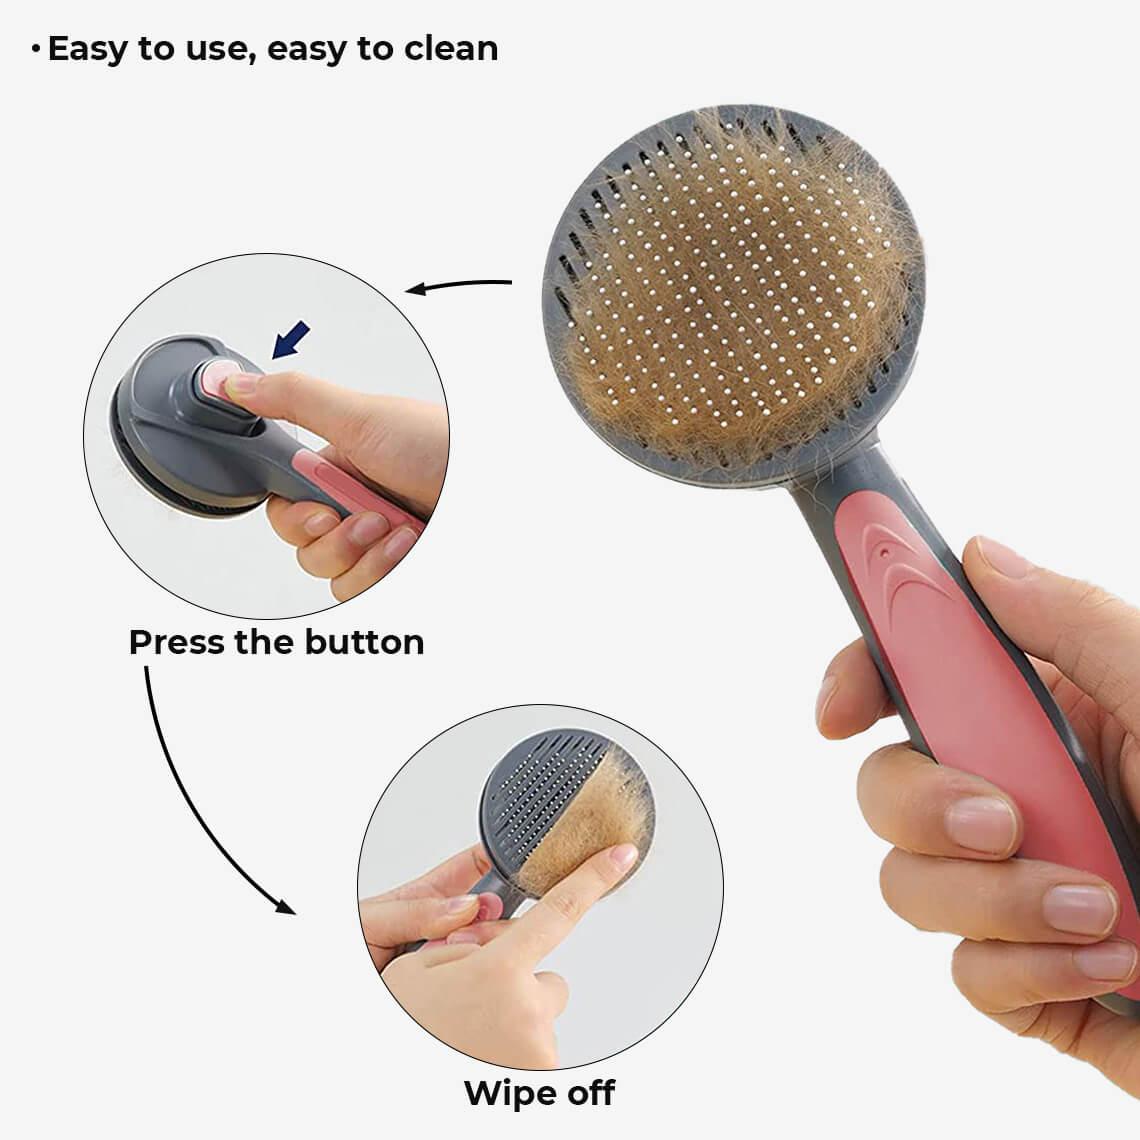 Show how to use the pet comb. Press the button to wipe off.